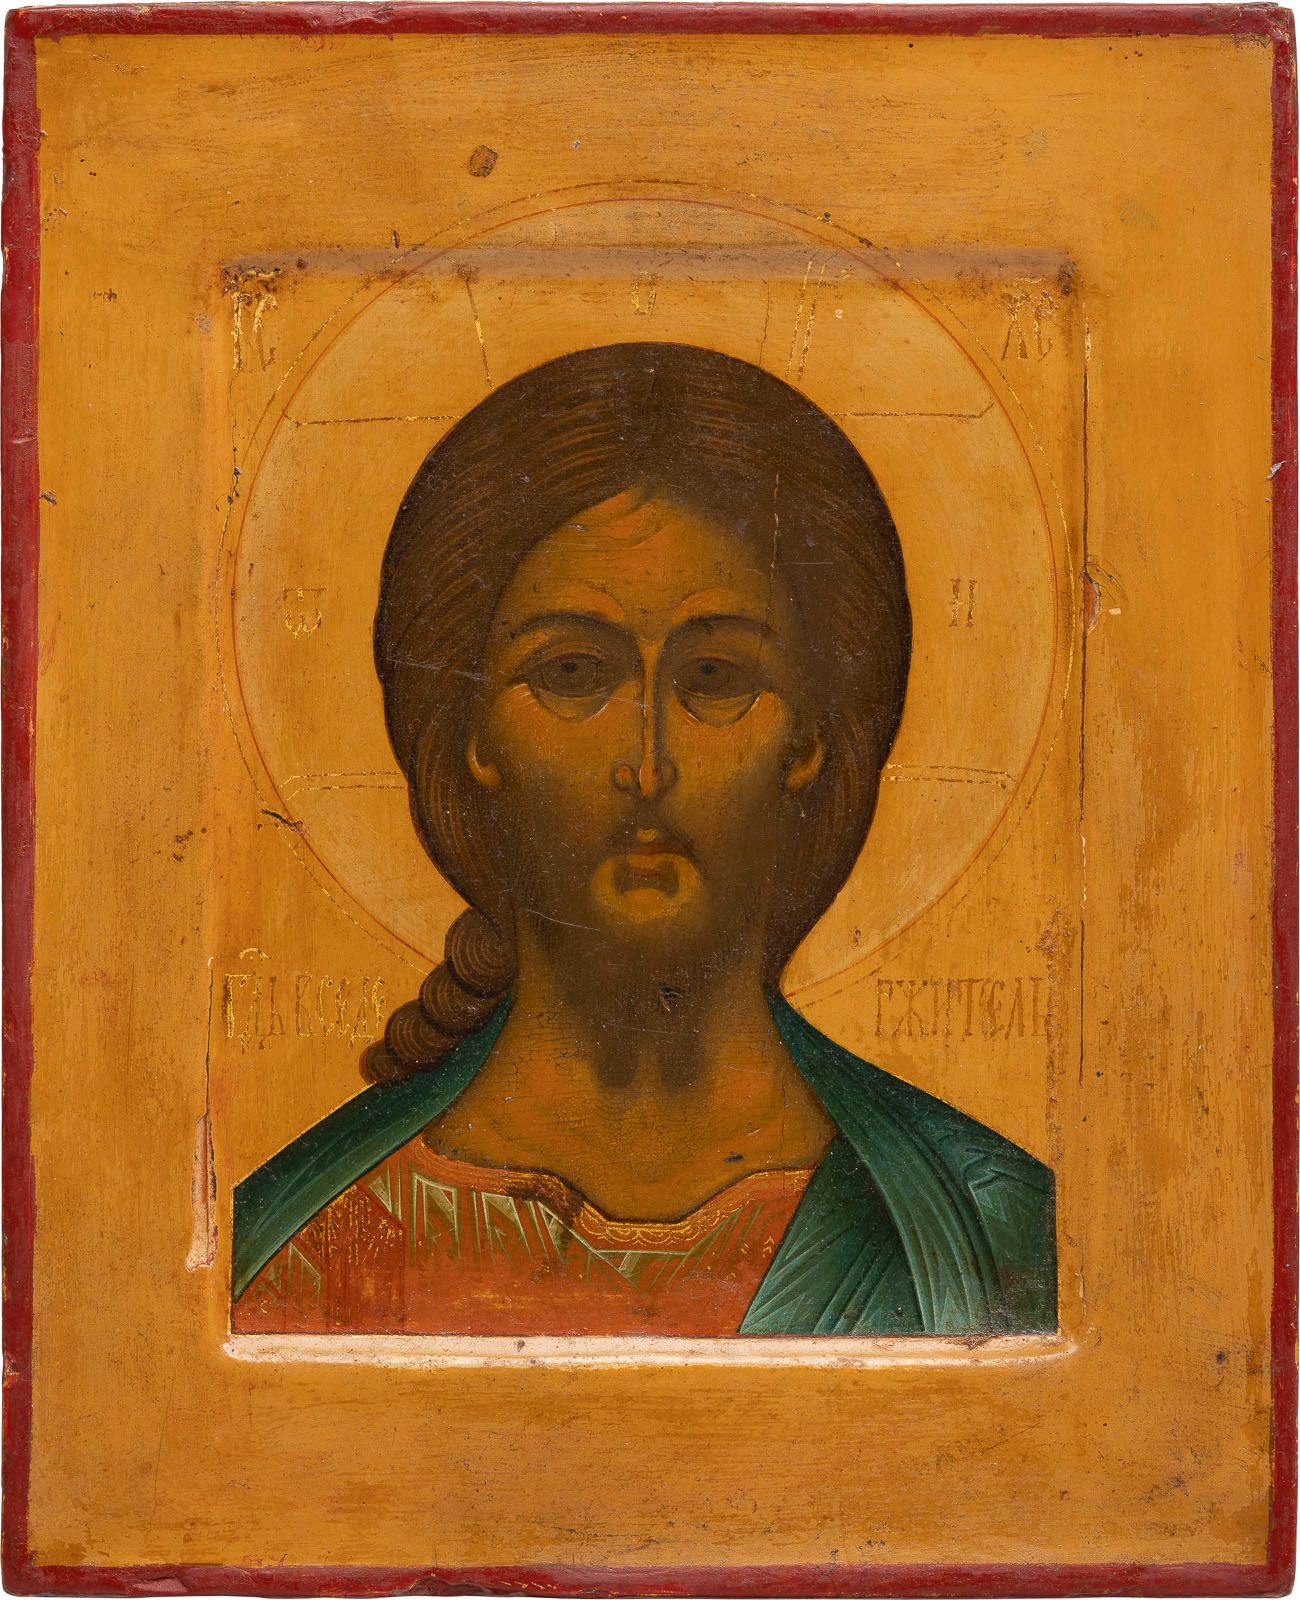 A SMALL ICON SHOWING CHRIST 'WITH THE FEARSOME EYE' A SMALL ICON SHOWING CHRIST &hellip;